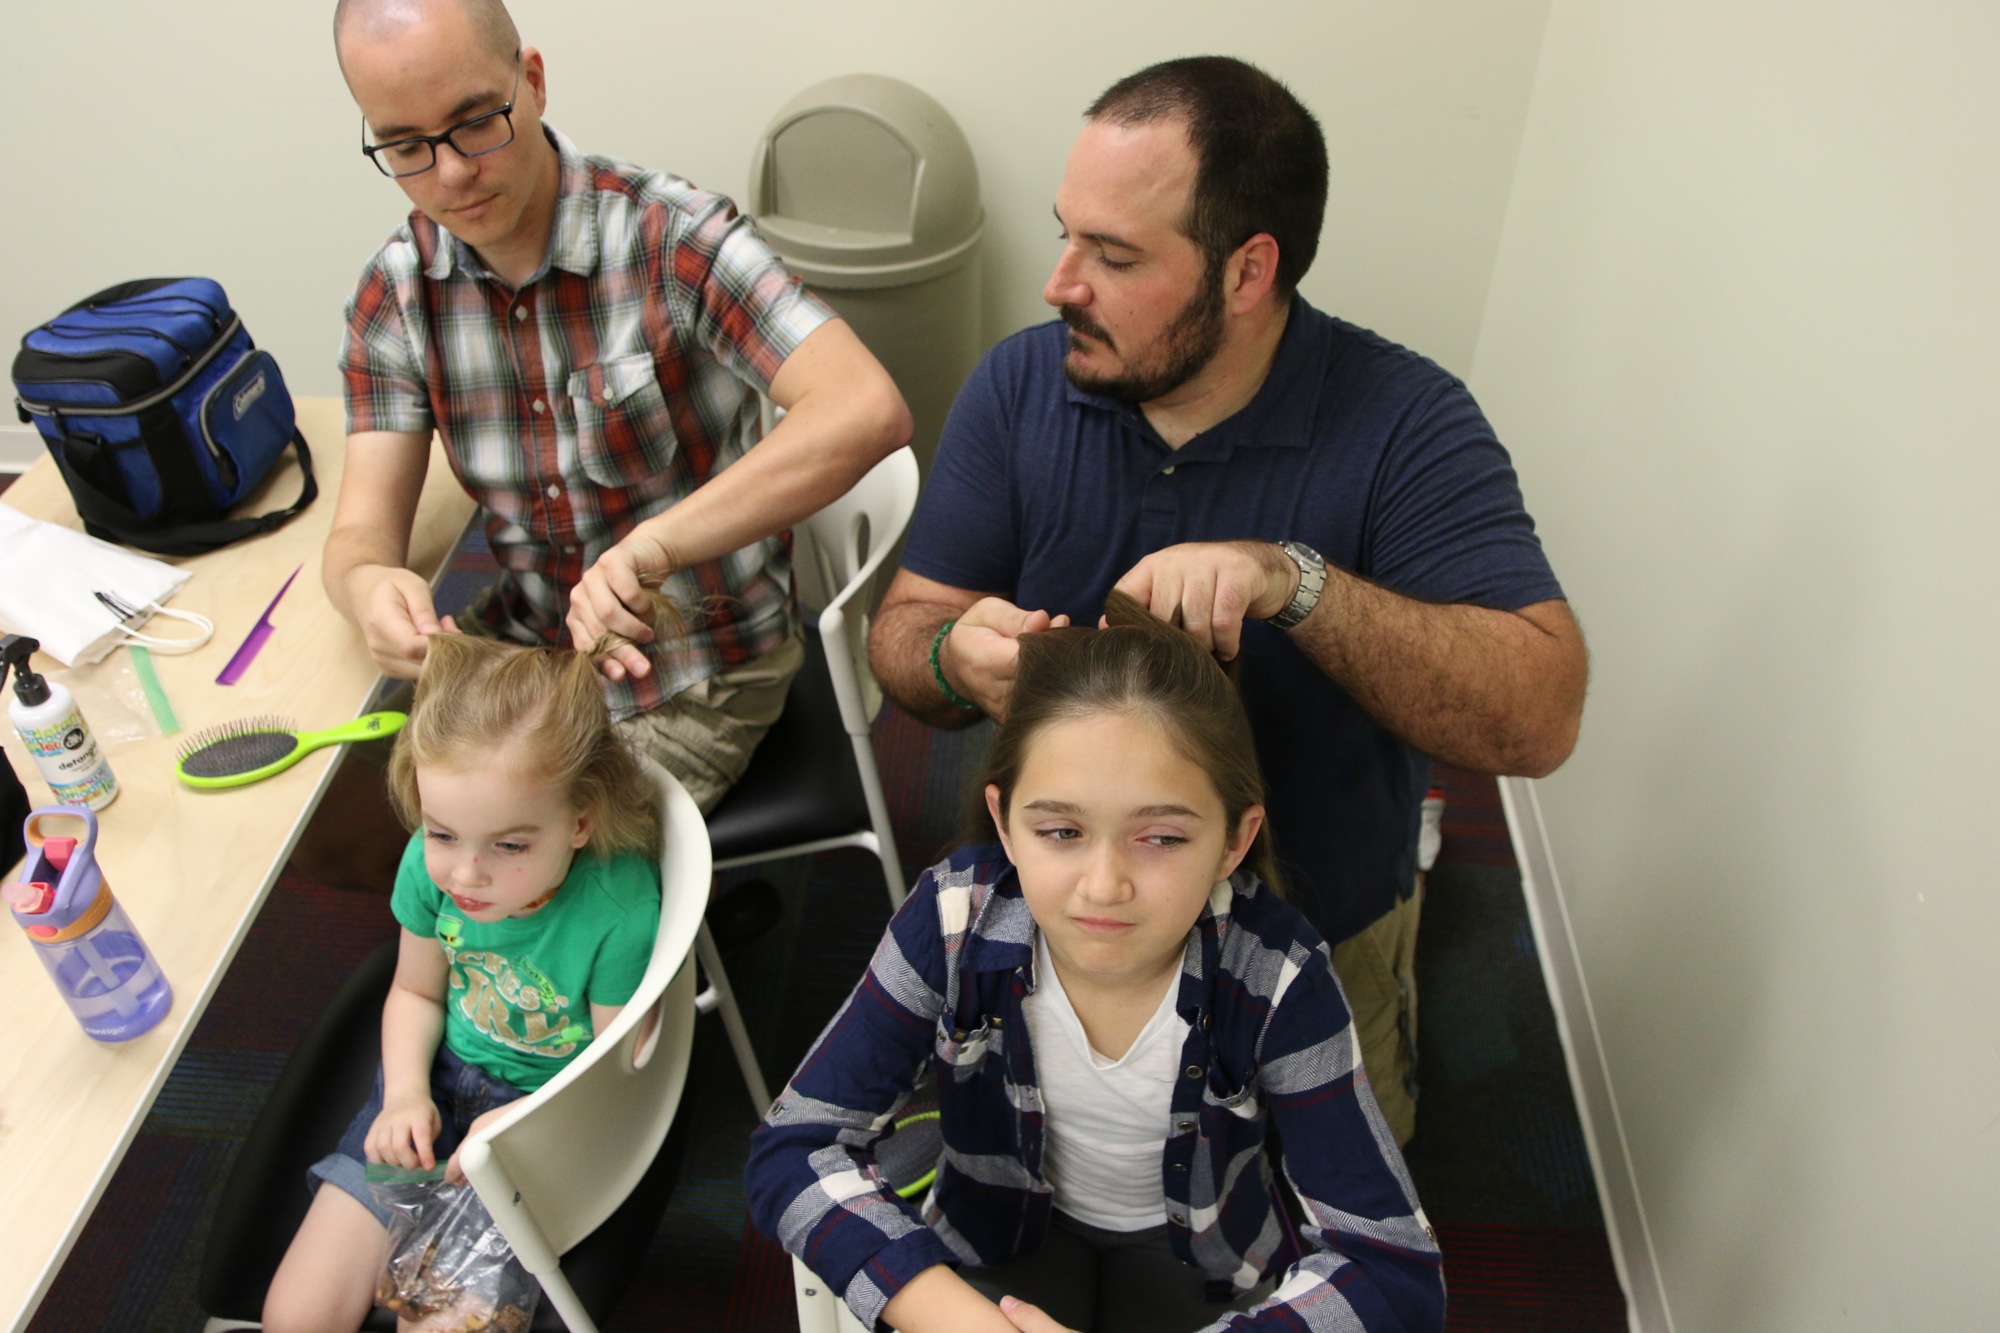 Alex Kolozvary practices braiding his daughter Charlotte Kolozvary's hair while Emma Morgese has her hair braided by her father, Philippe Morgese. Photo by Nichole Osinski